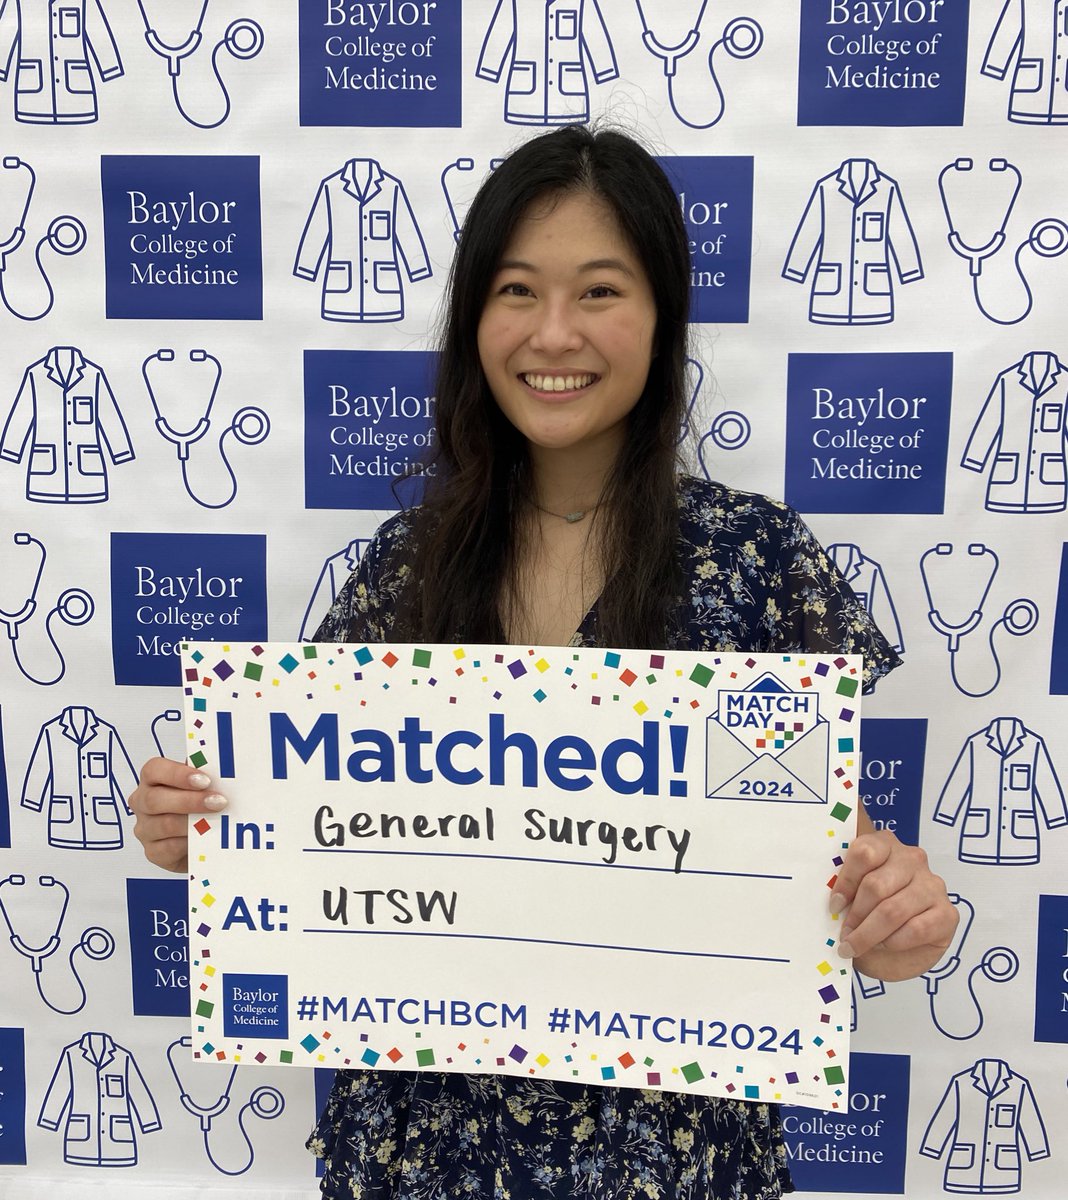 I MATCHED TO UTSW! I can’t wait to come back home to Dallas and begin my general surgery training at @UTSW_Surgery 🤩 Thank you to my friends, family, and mentors at @BCM_Surgery & @BCMGSRes for their support during this journey #Match2024 #GenSurgMatch2024 #MatchDay2024